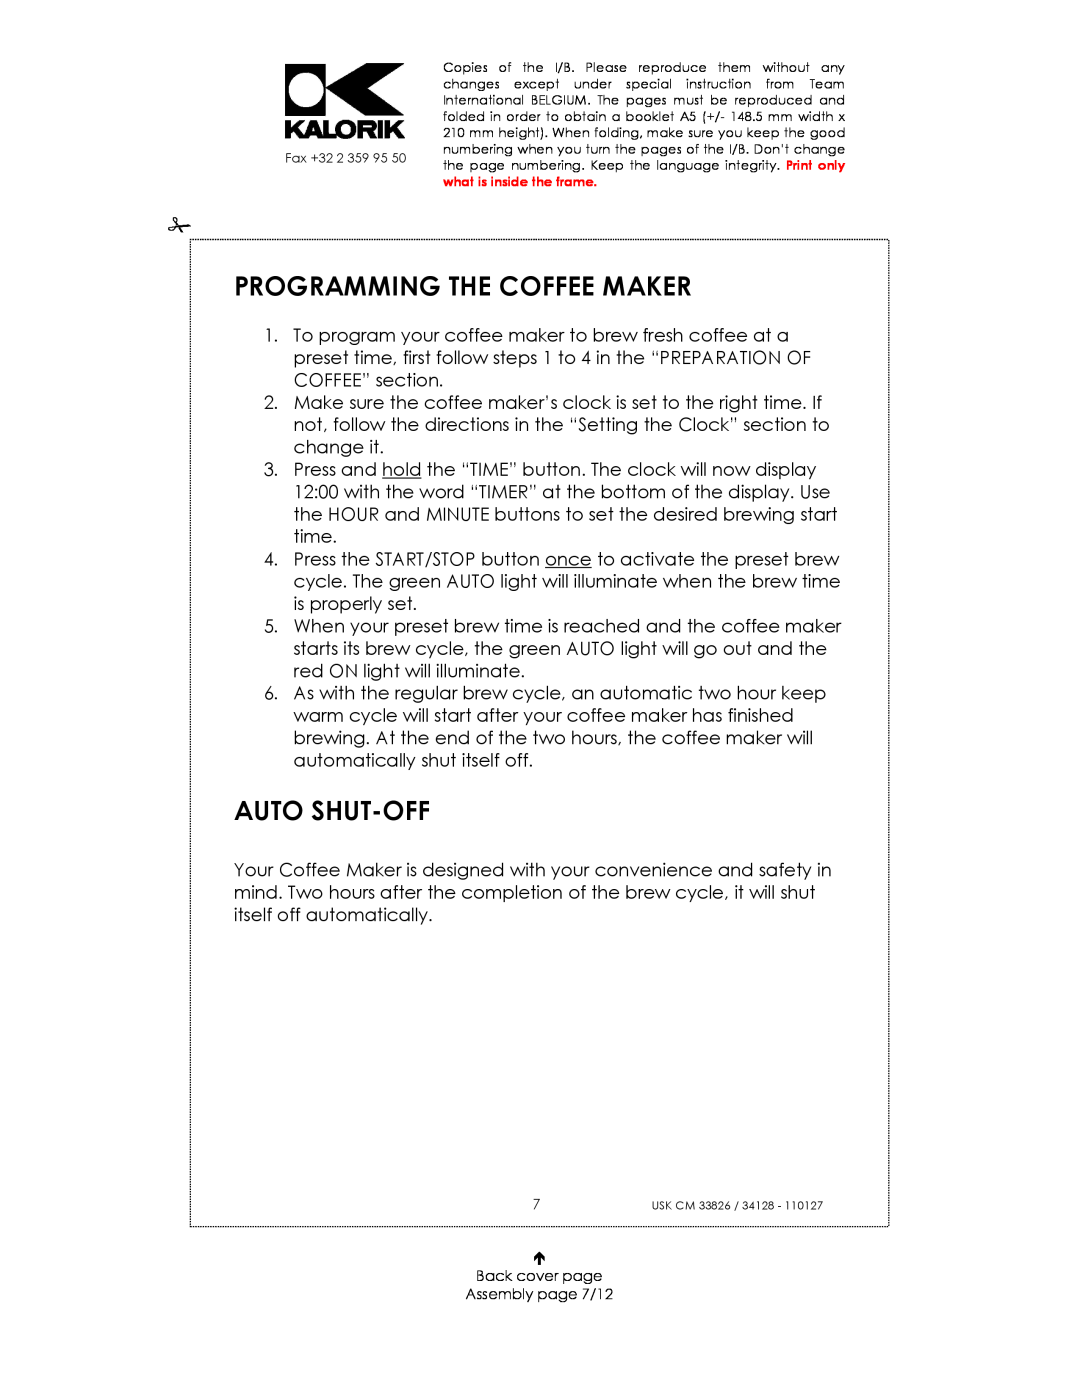 Kalorik USK CM 23826, USK CM 34128 manual Programming The Coffee Maker, Auto Shut-Off, Back cover page Assembly page 7/12 